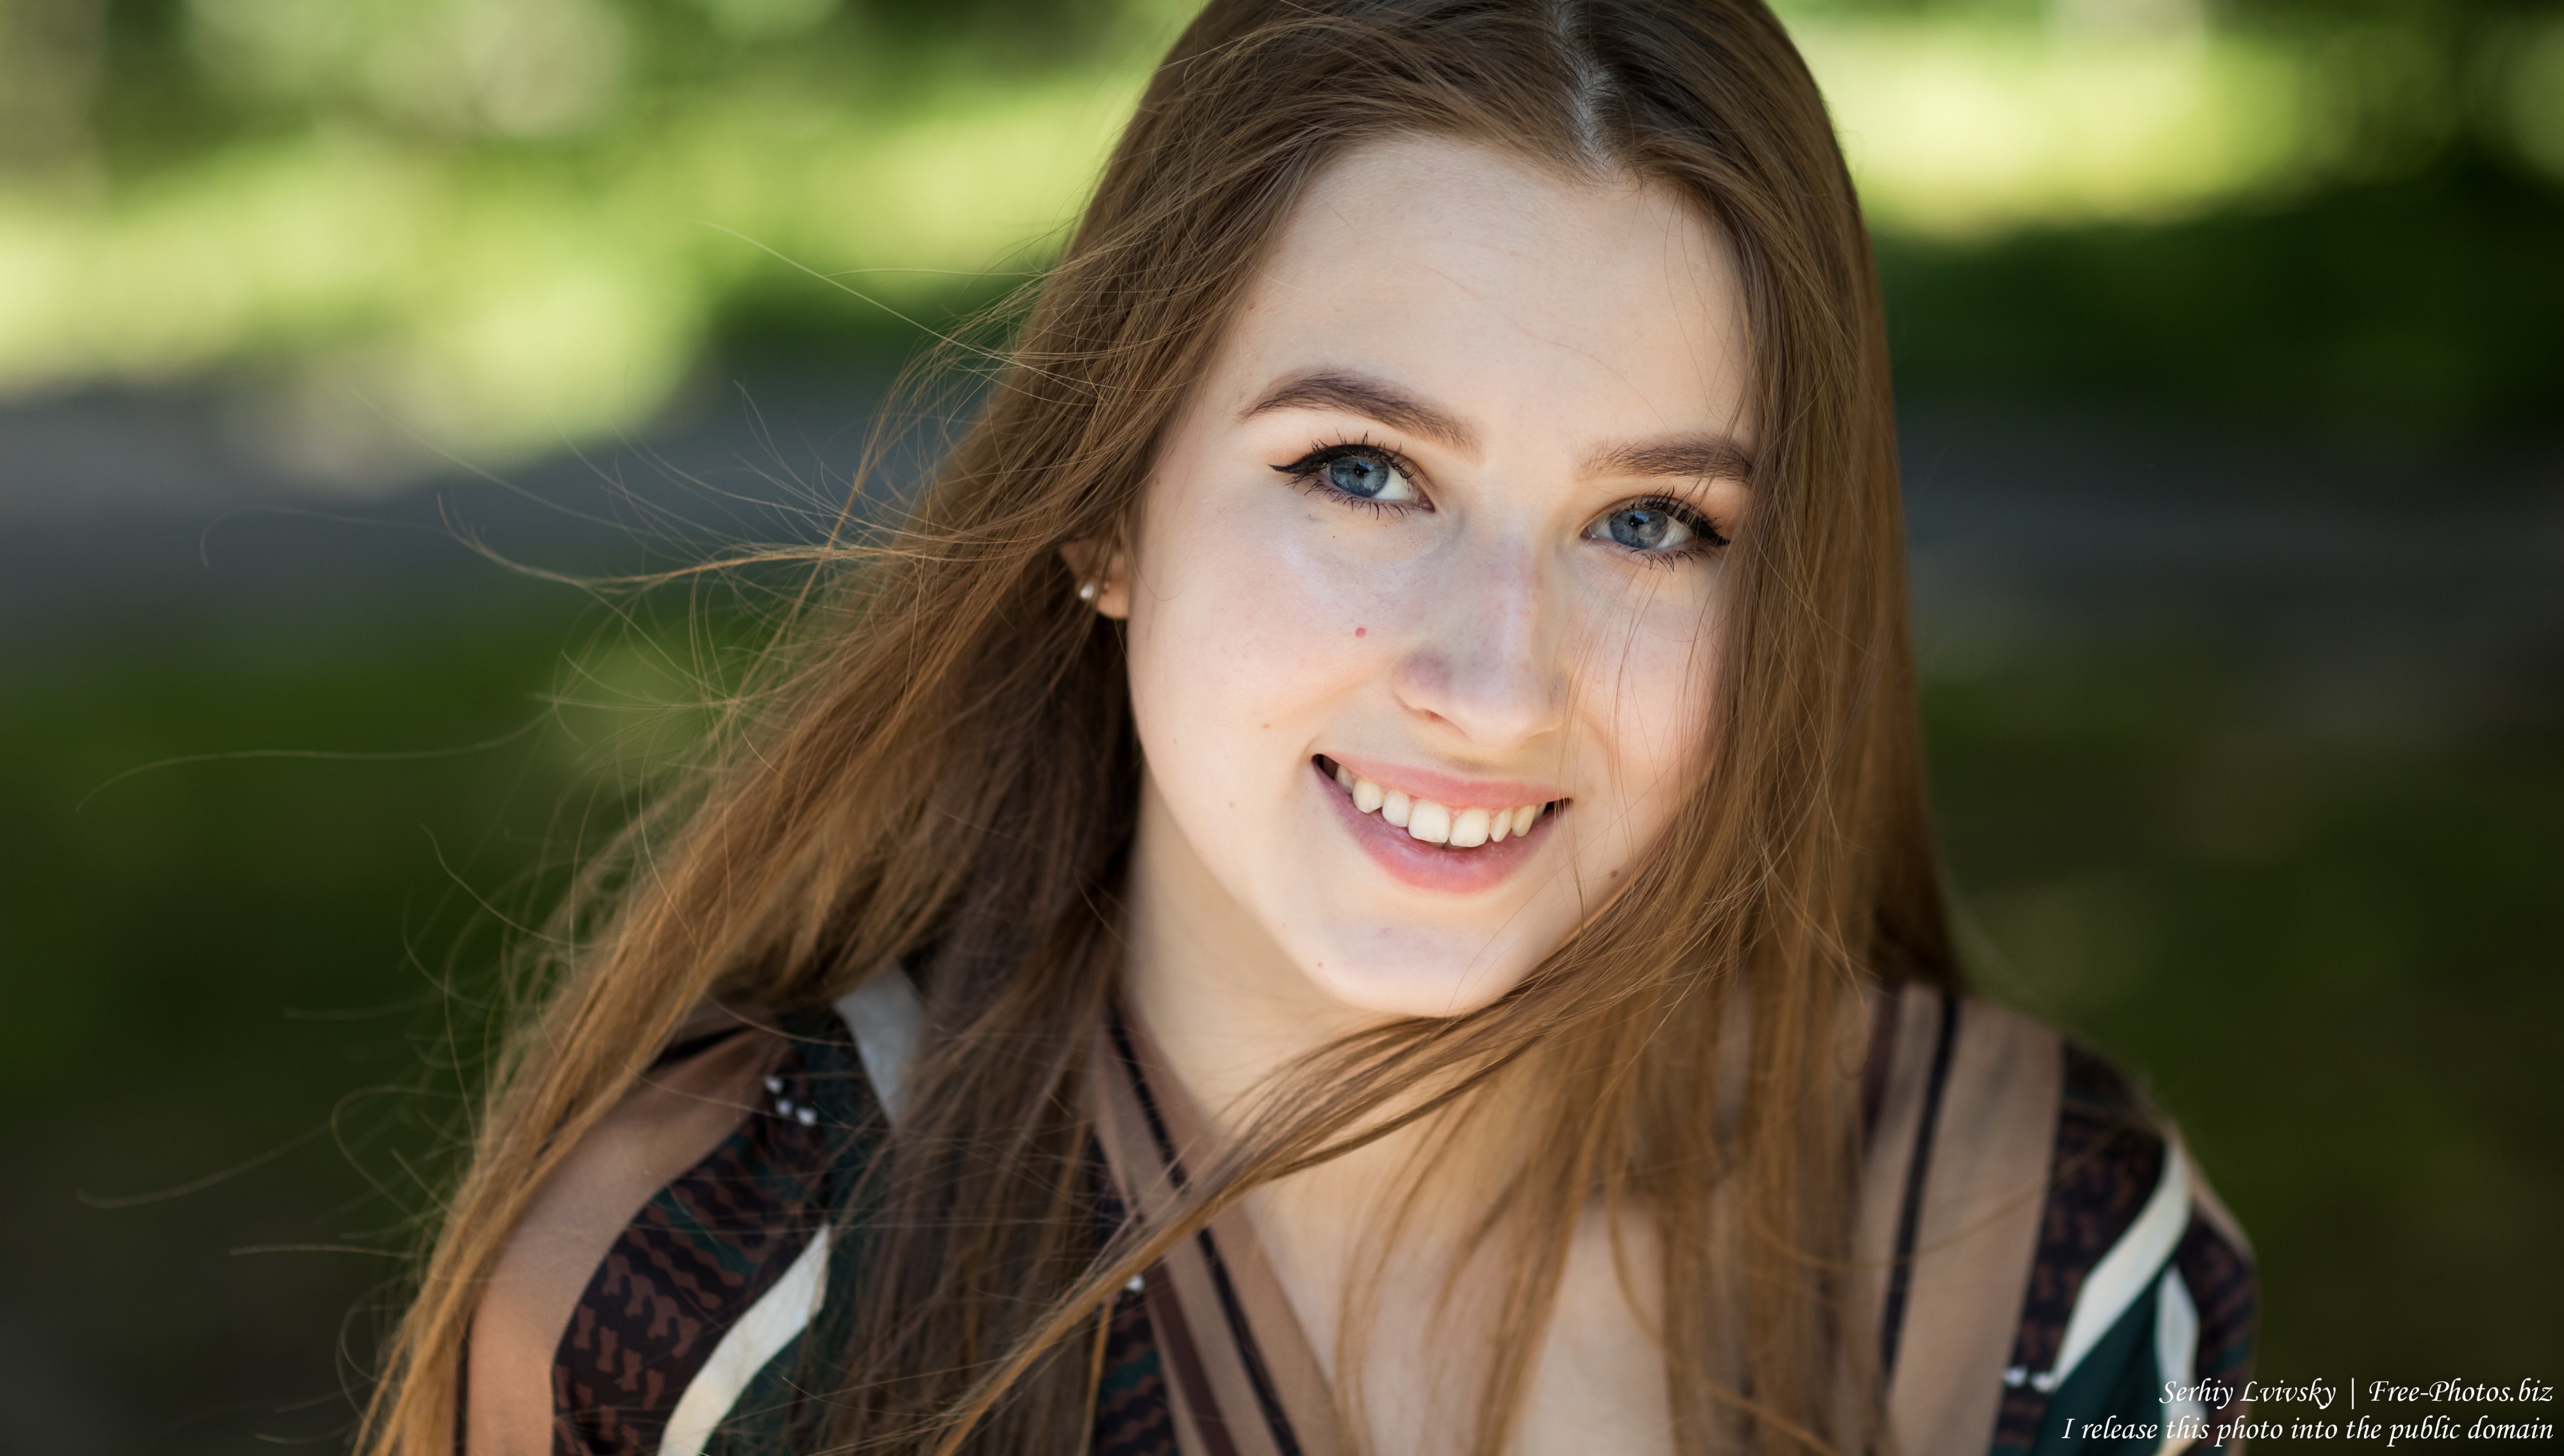 Vika - a 17-year-old girl with blue eyes and natural fair hair photographed in June 2019 by Serhiy Lvivsky, picture 29